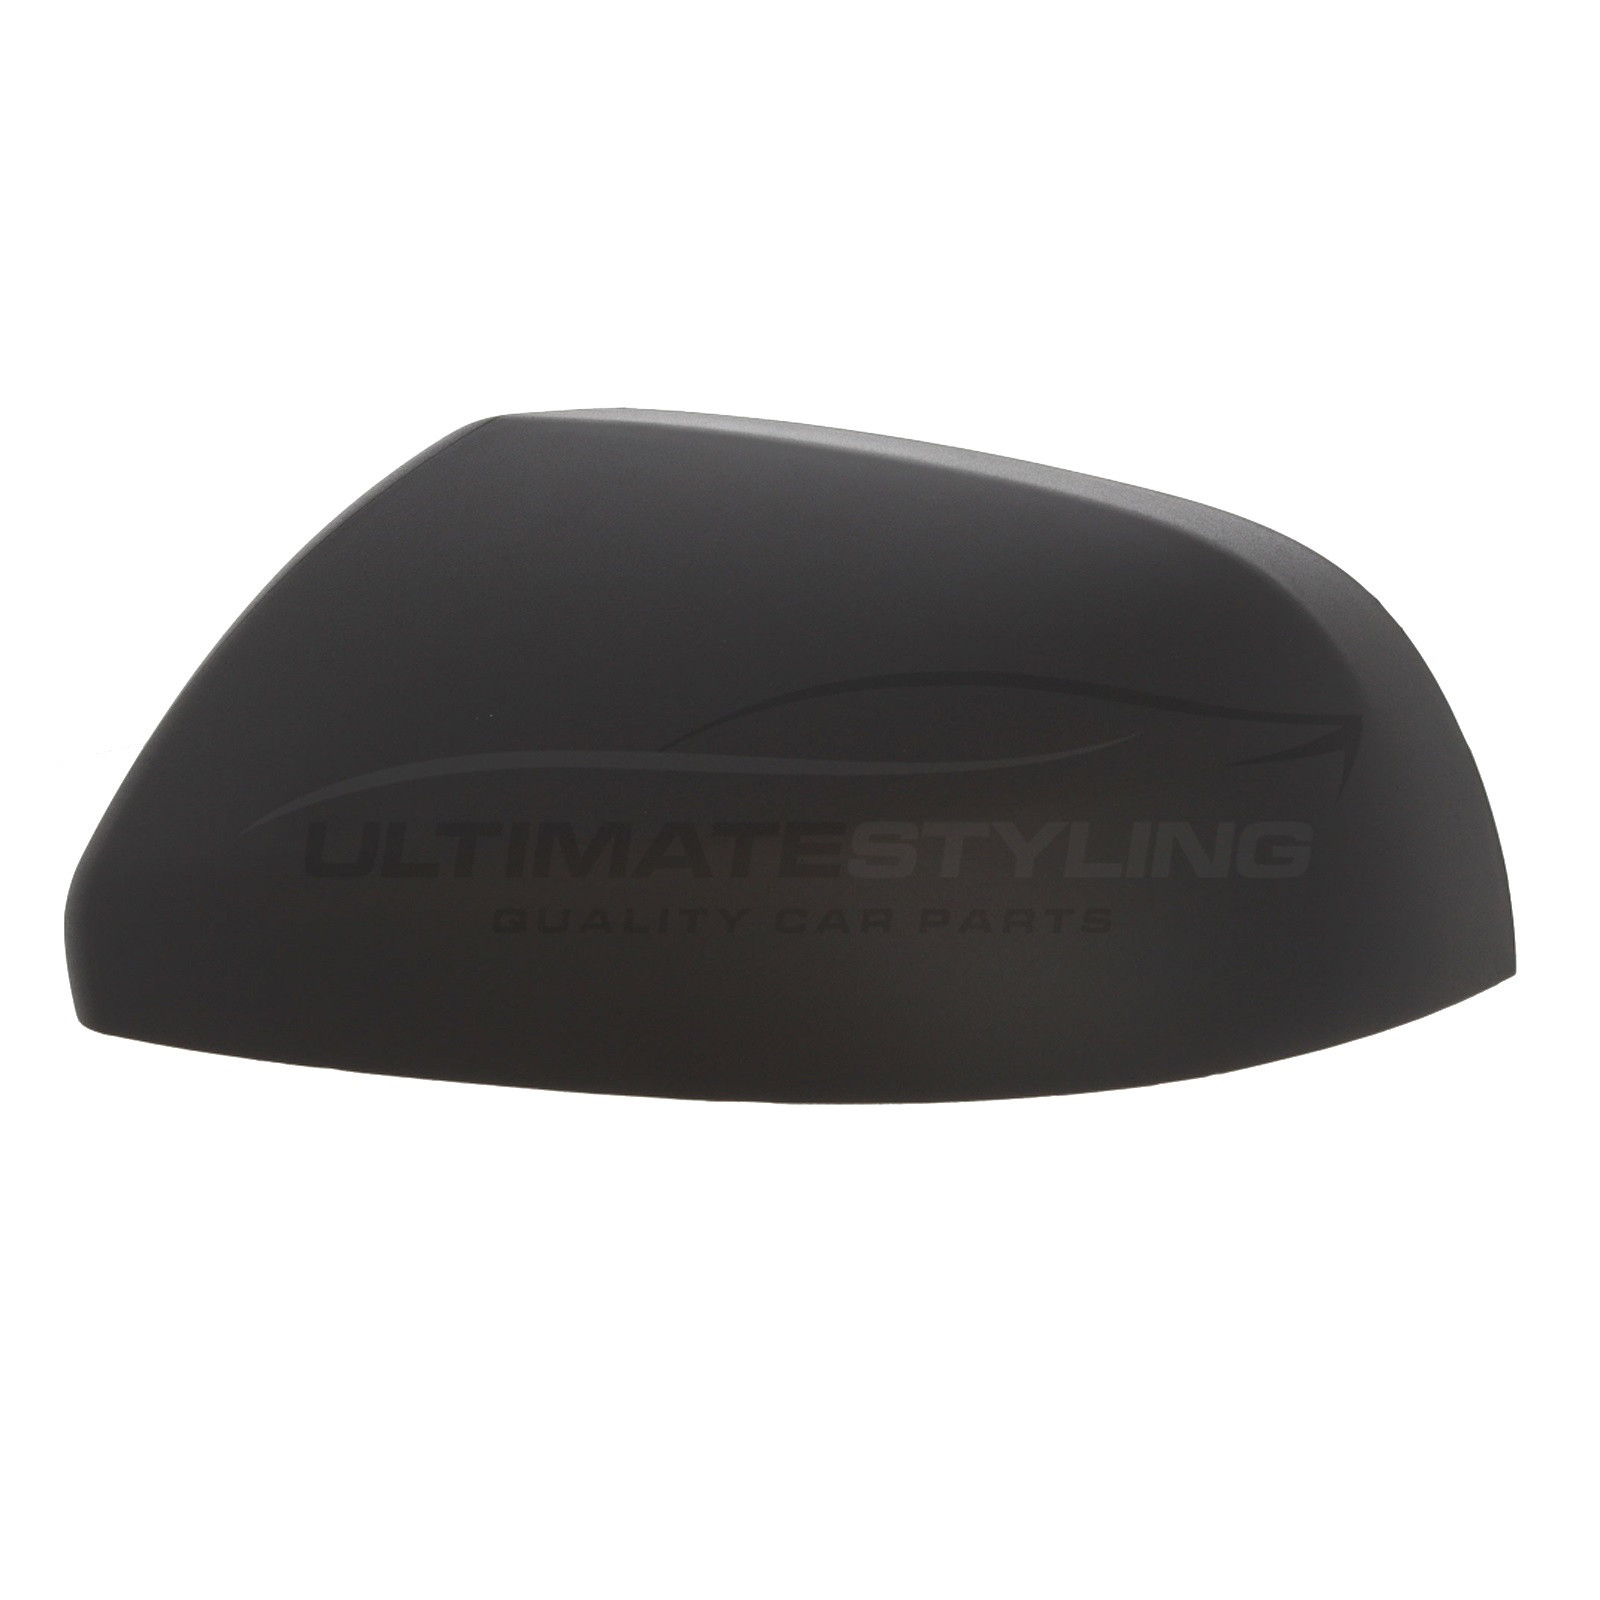 Mercedes Benz Vito 2015-> Wing Mirror Cover Cap Casing Black (Textured)  Passenger Side (LH)